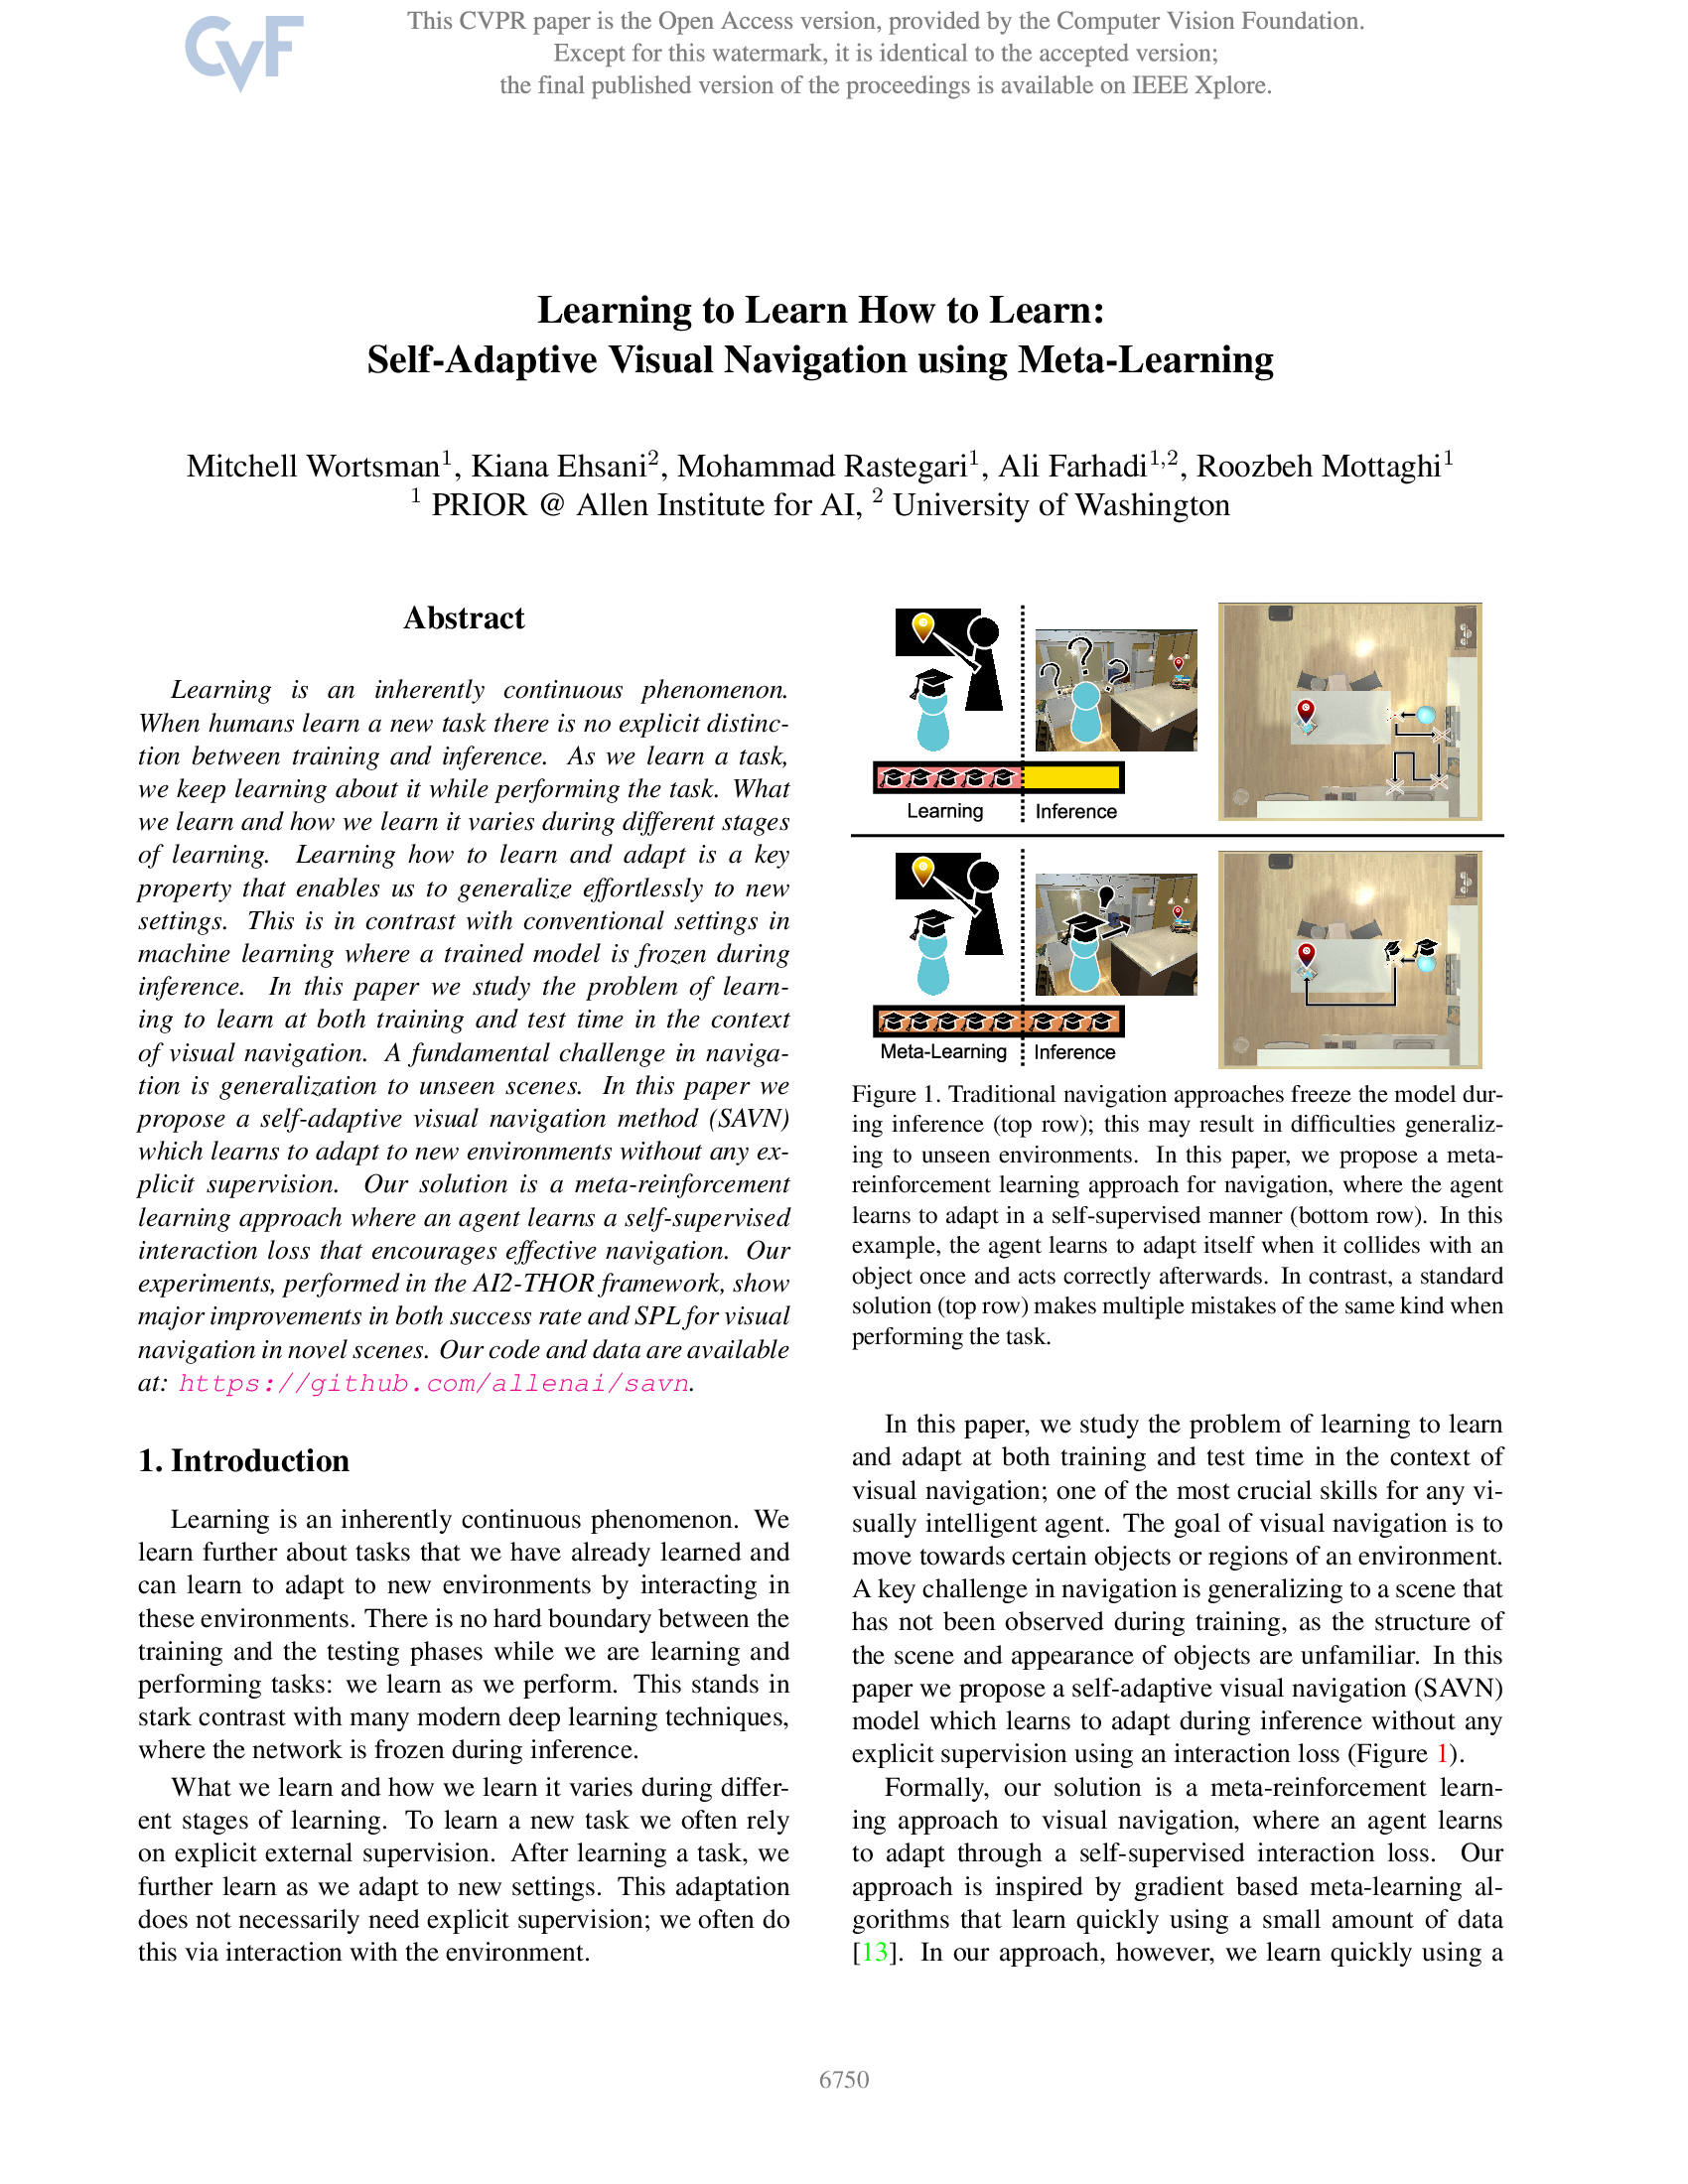 Learning to Learn How to Learn: Self-Adaptive Visual Navigation Using Meta-Learning